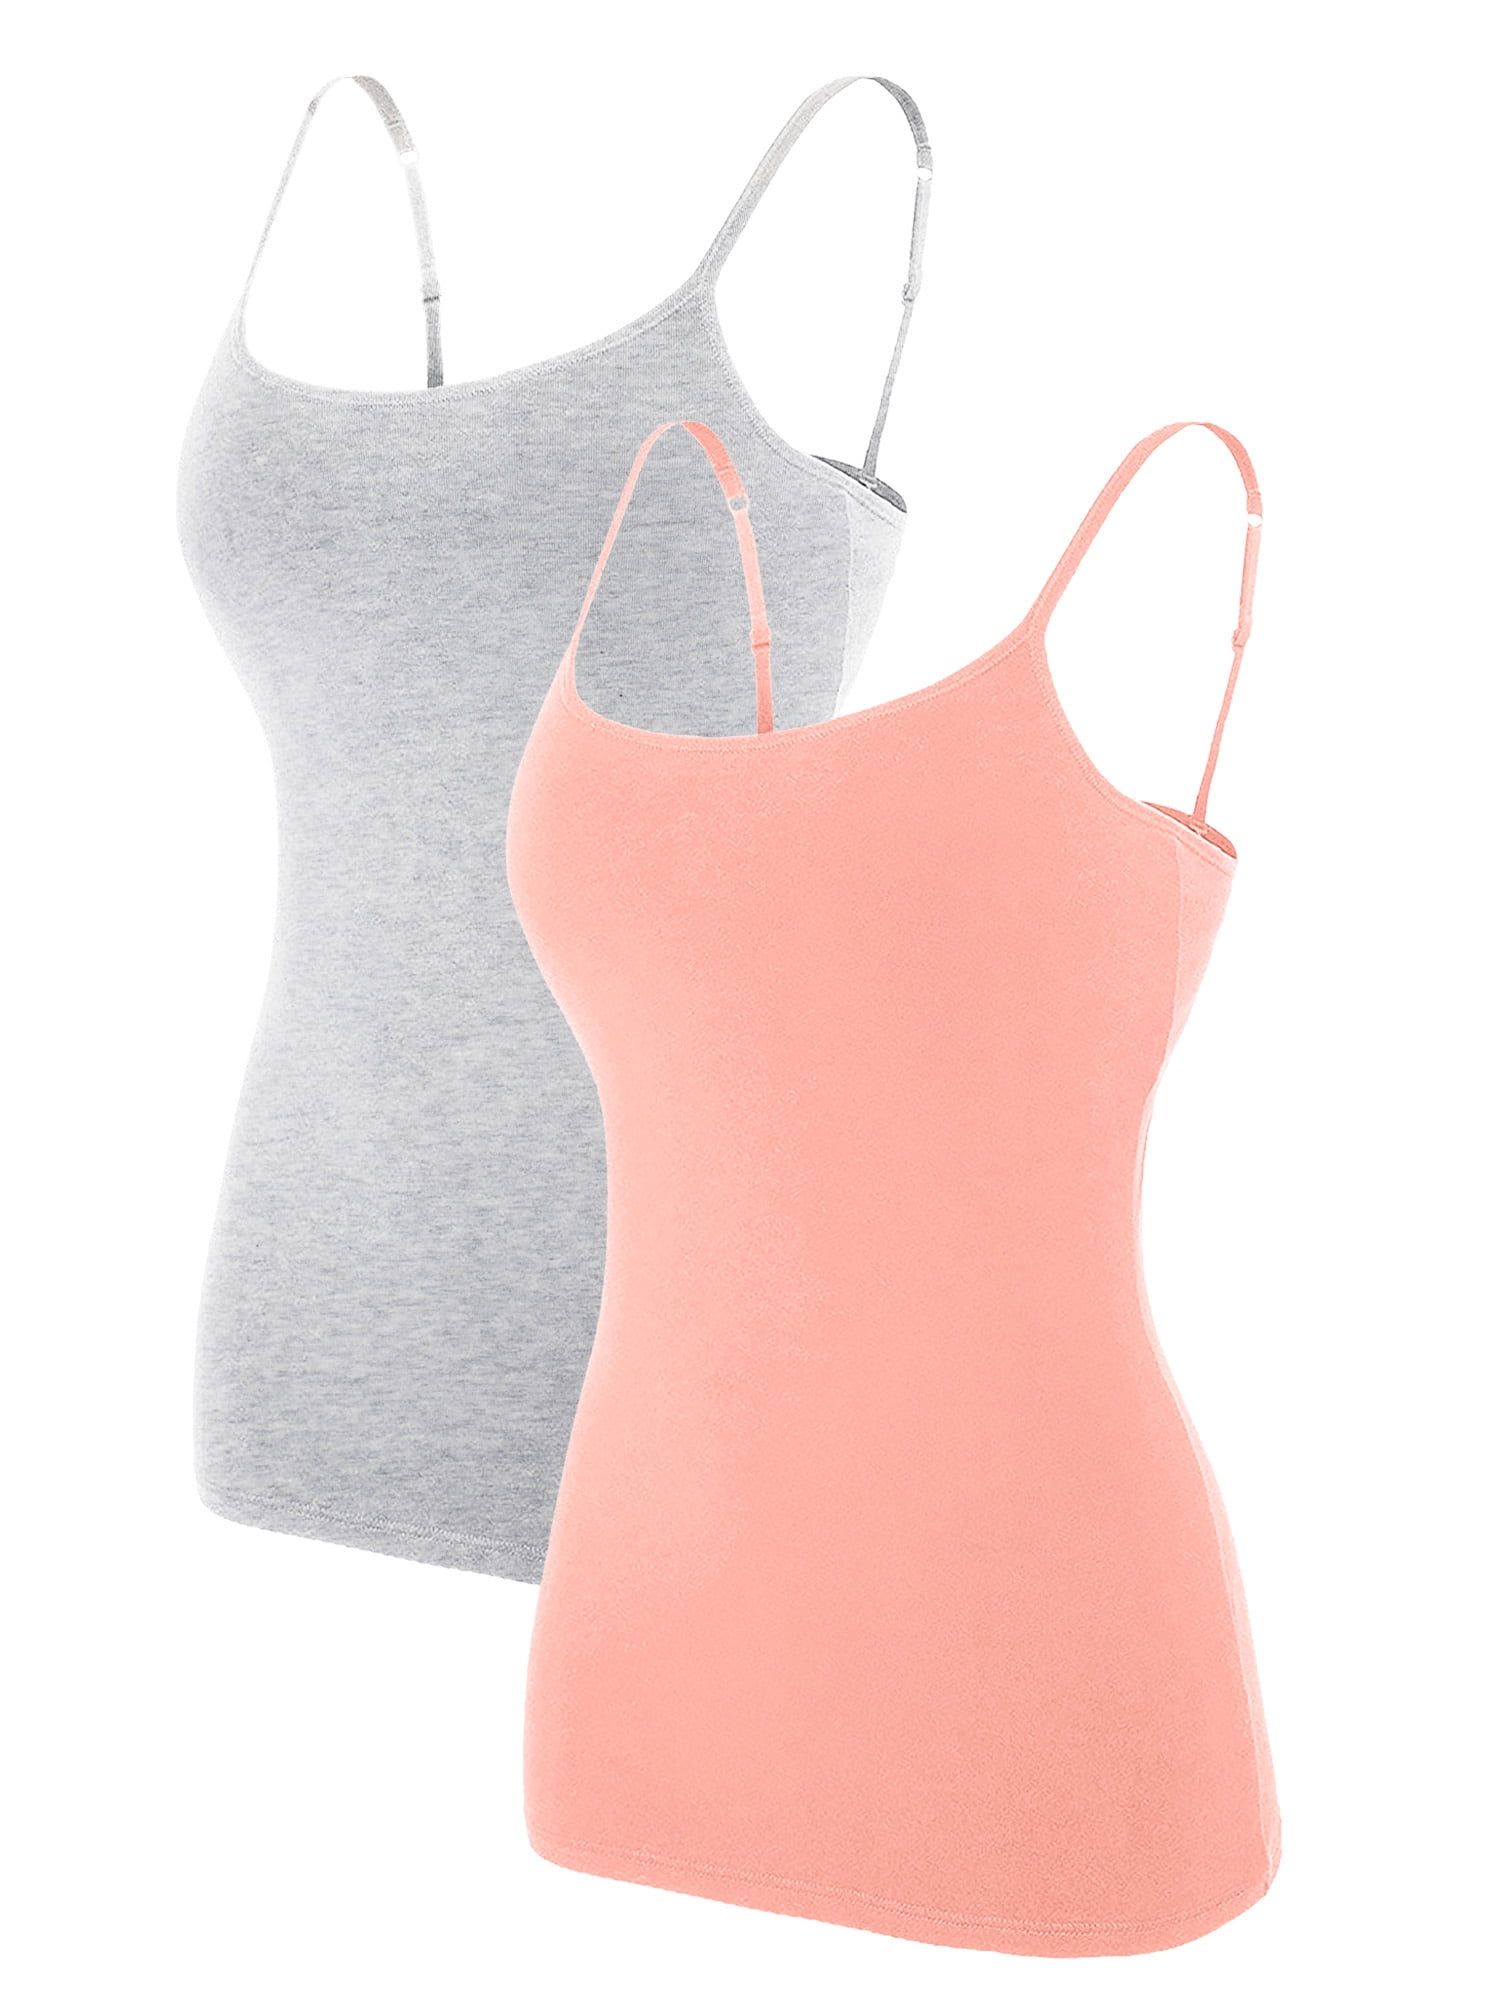 Summer Sleeveless Padded Shirt Women Camisoles Tops with Built In Bra  Spaghetti Strap Basic Tank Top – the best products in the Joom Geek online  store